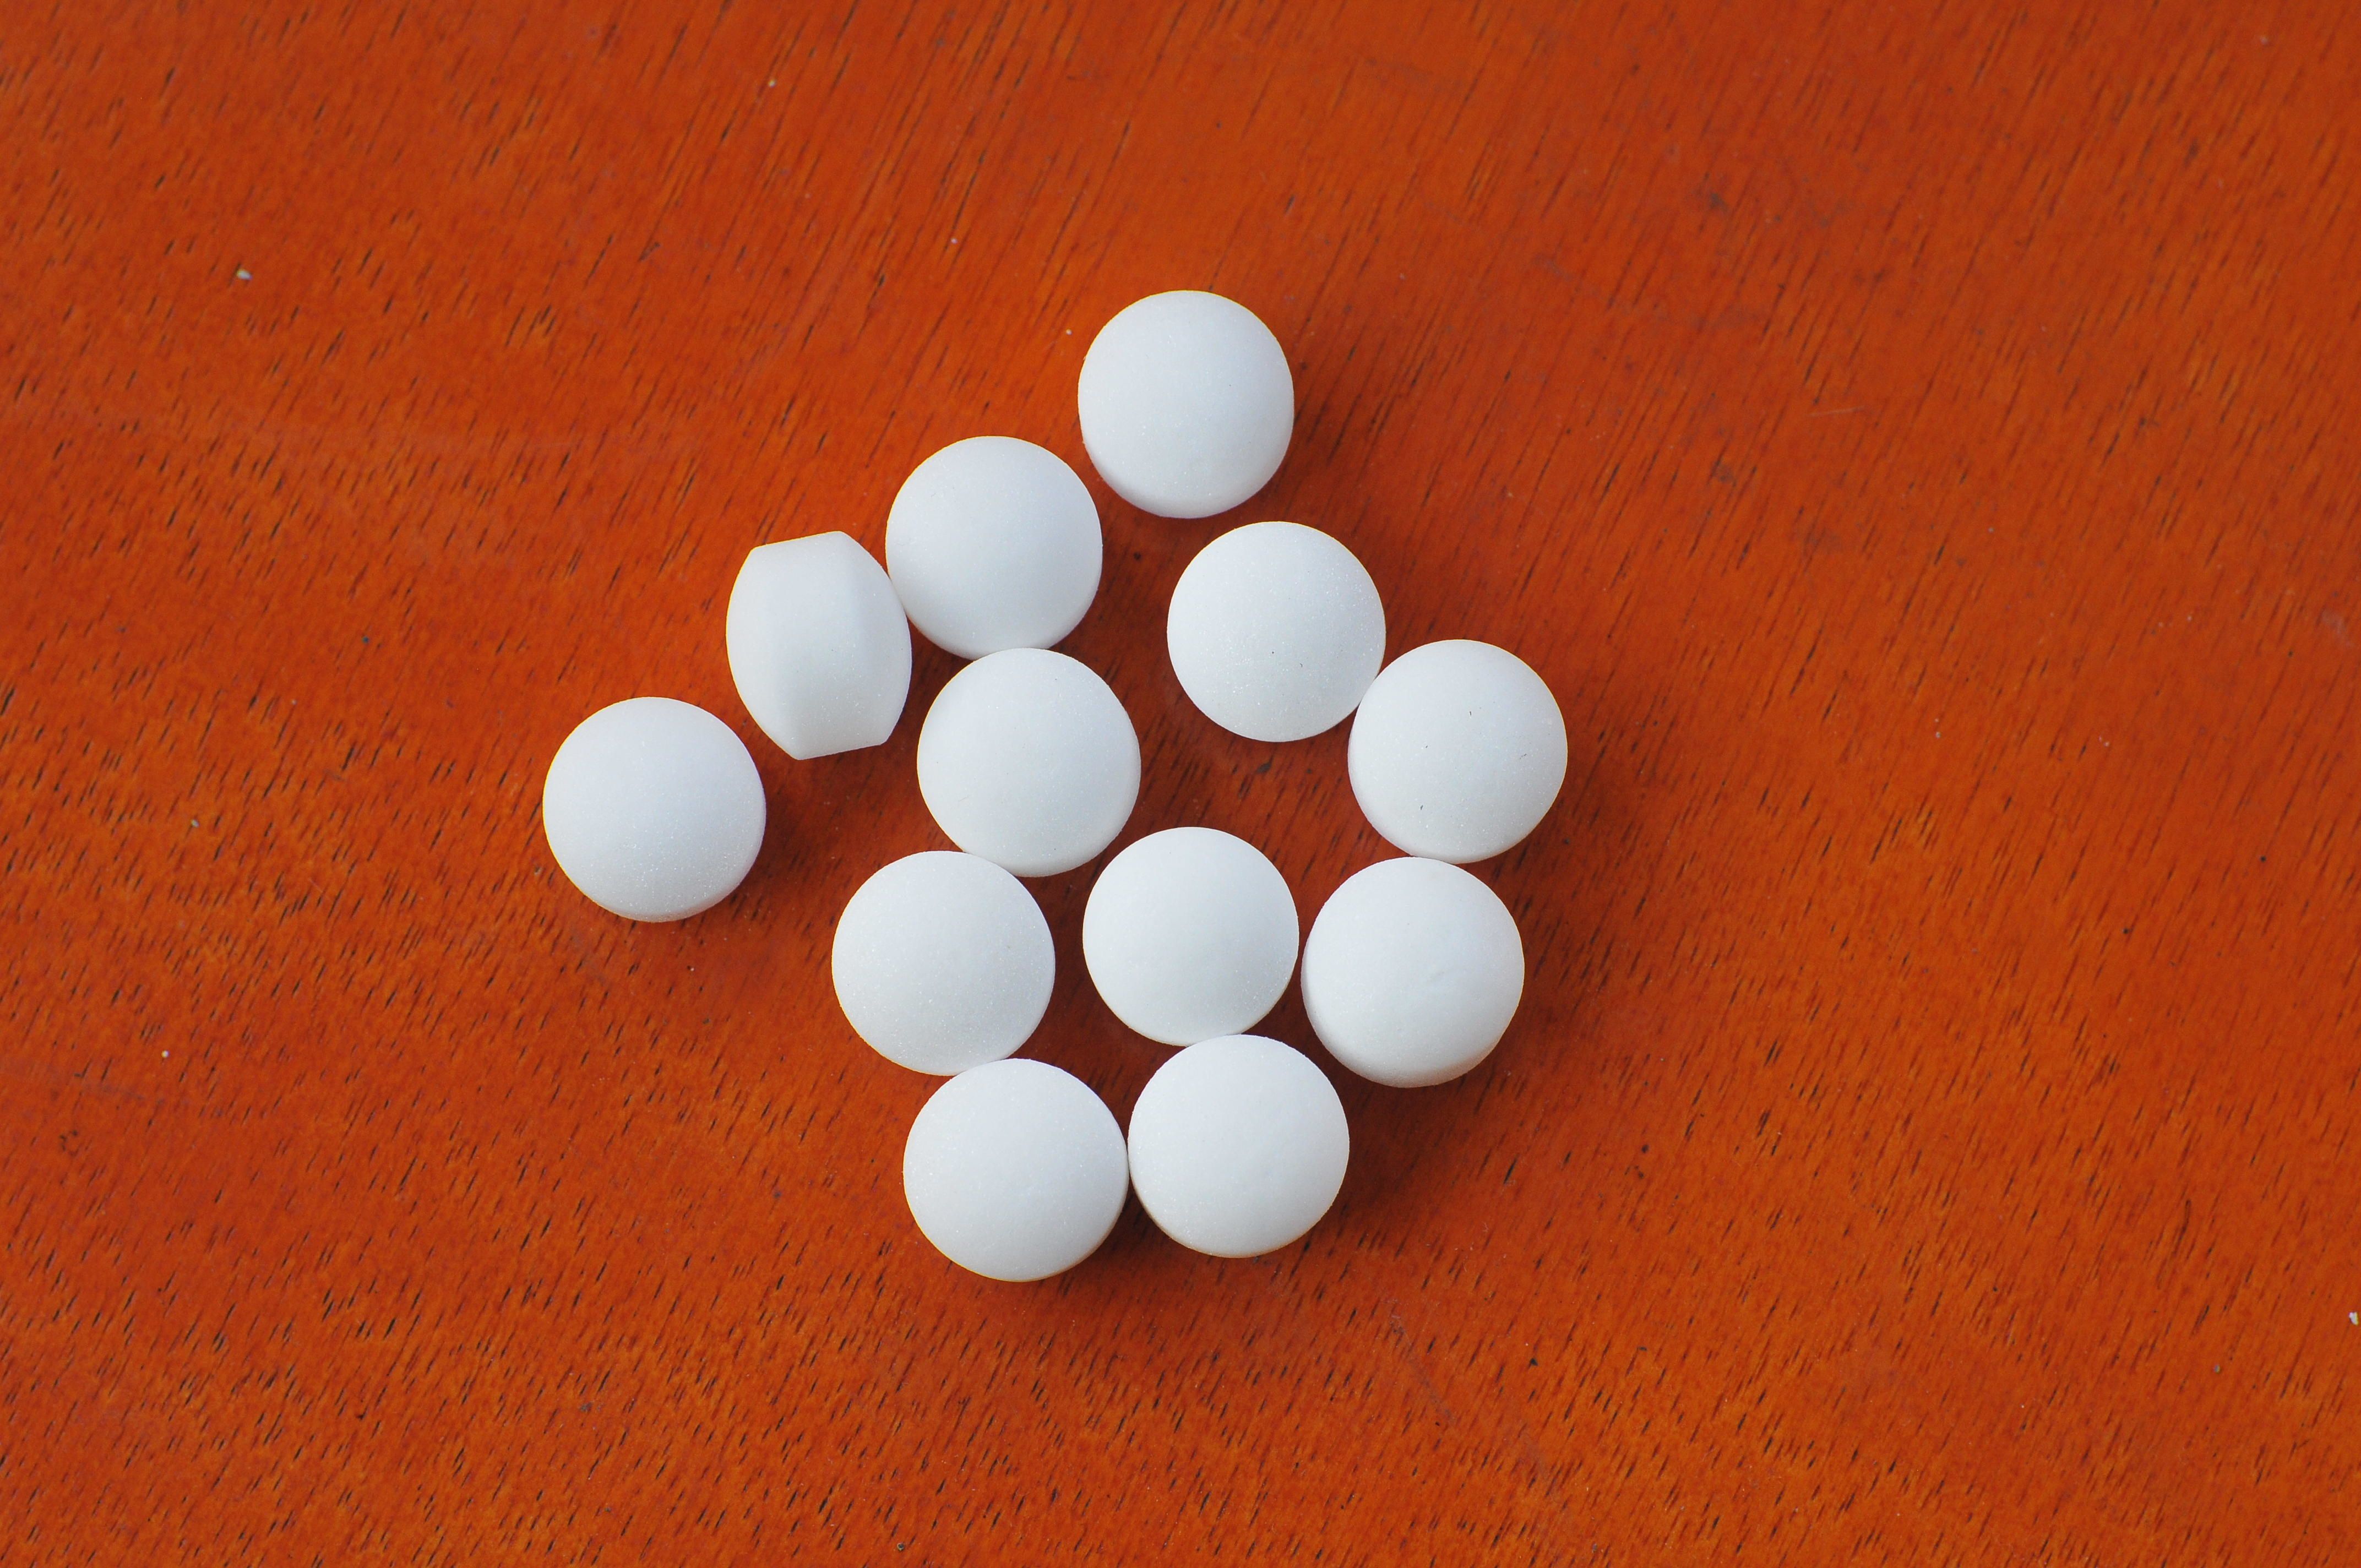 https://hips.hearstapps.com/hmg-prod/images/high-angle-view-of-mothballs-on-wooden-table-royalty-free-image-1582250925.jpg